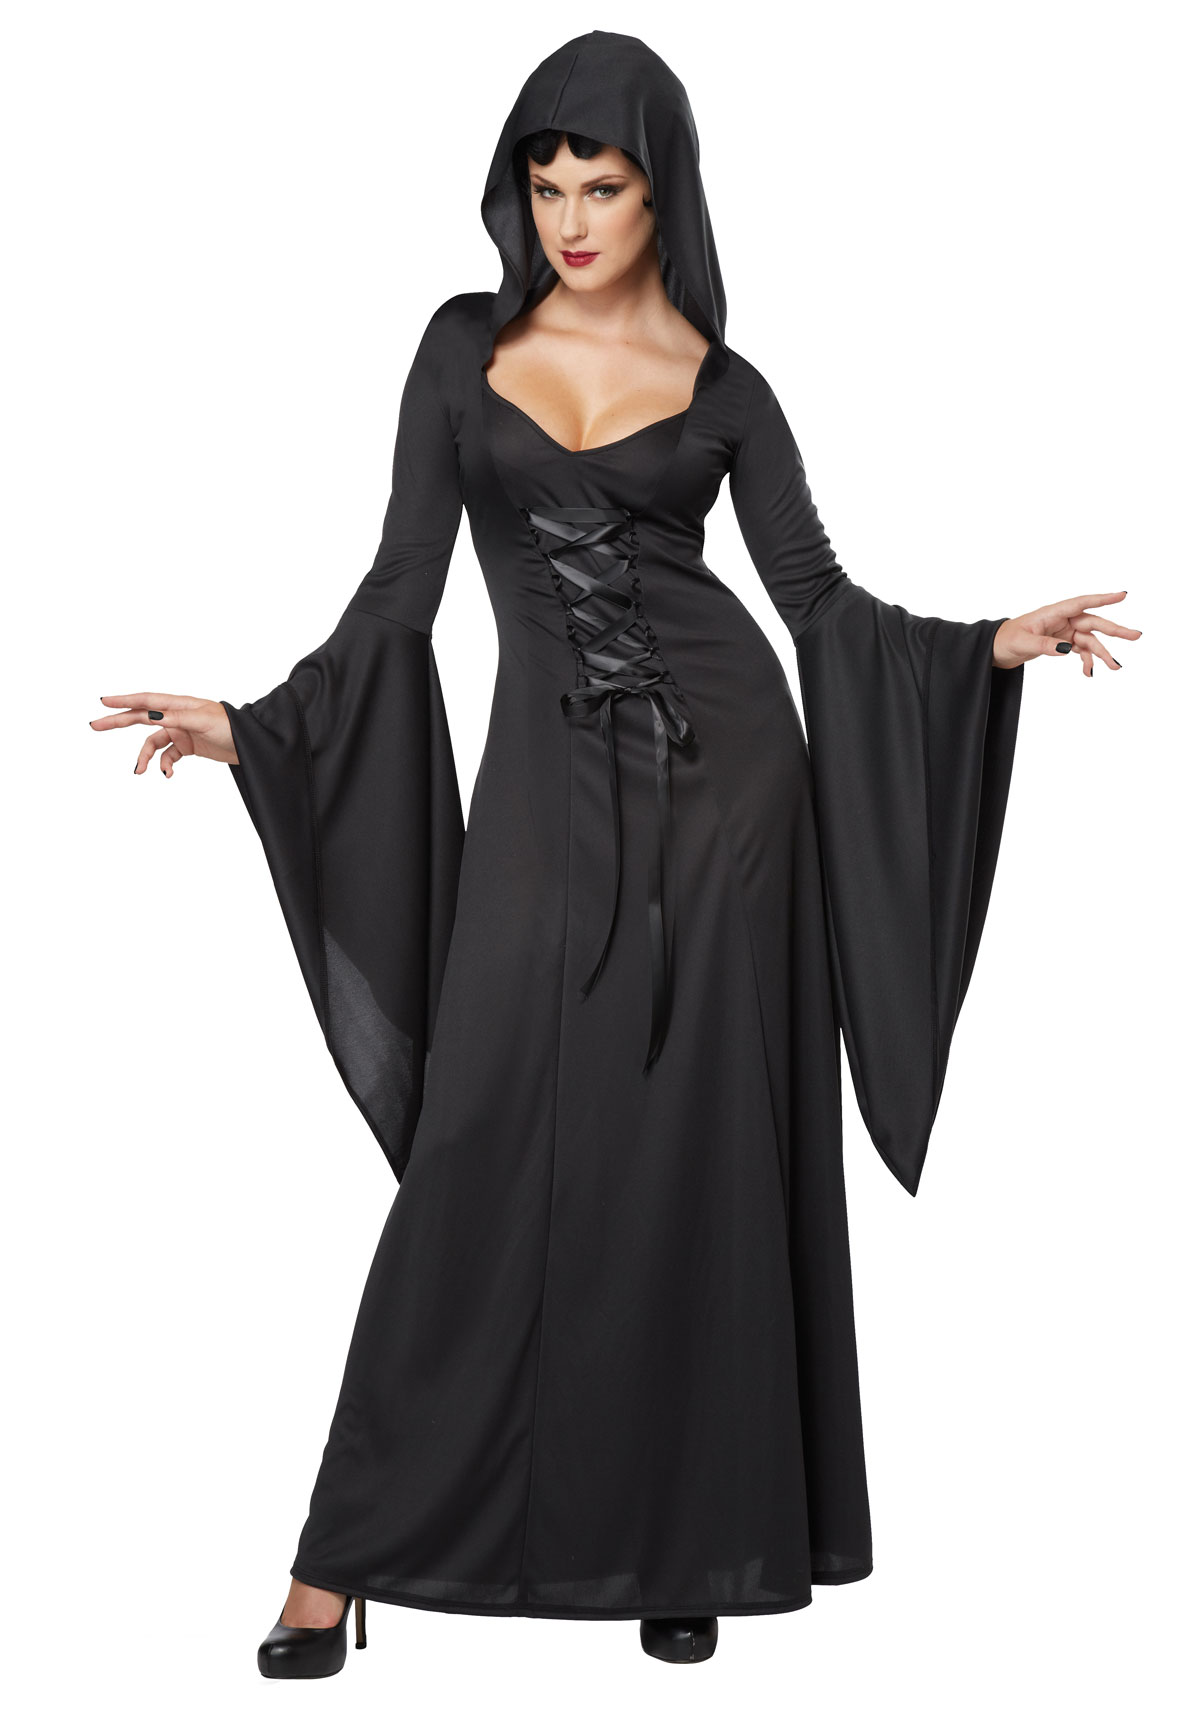 CALIFORNIA COSTUME COLLECTIONS Deluxe Hooded Robe - Black